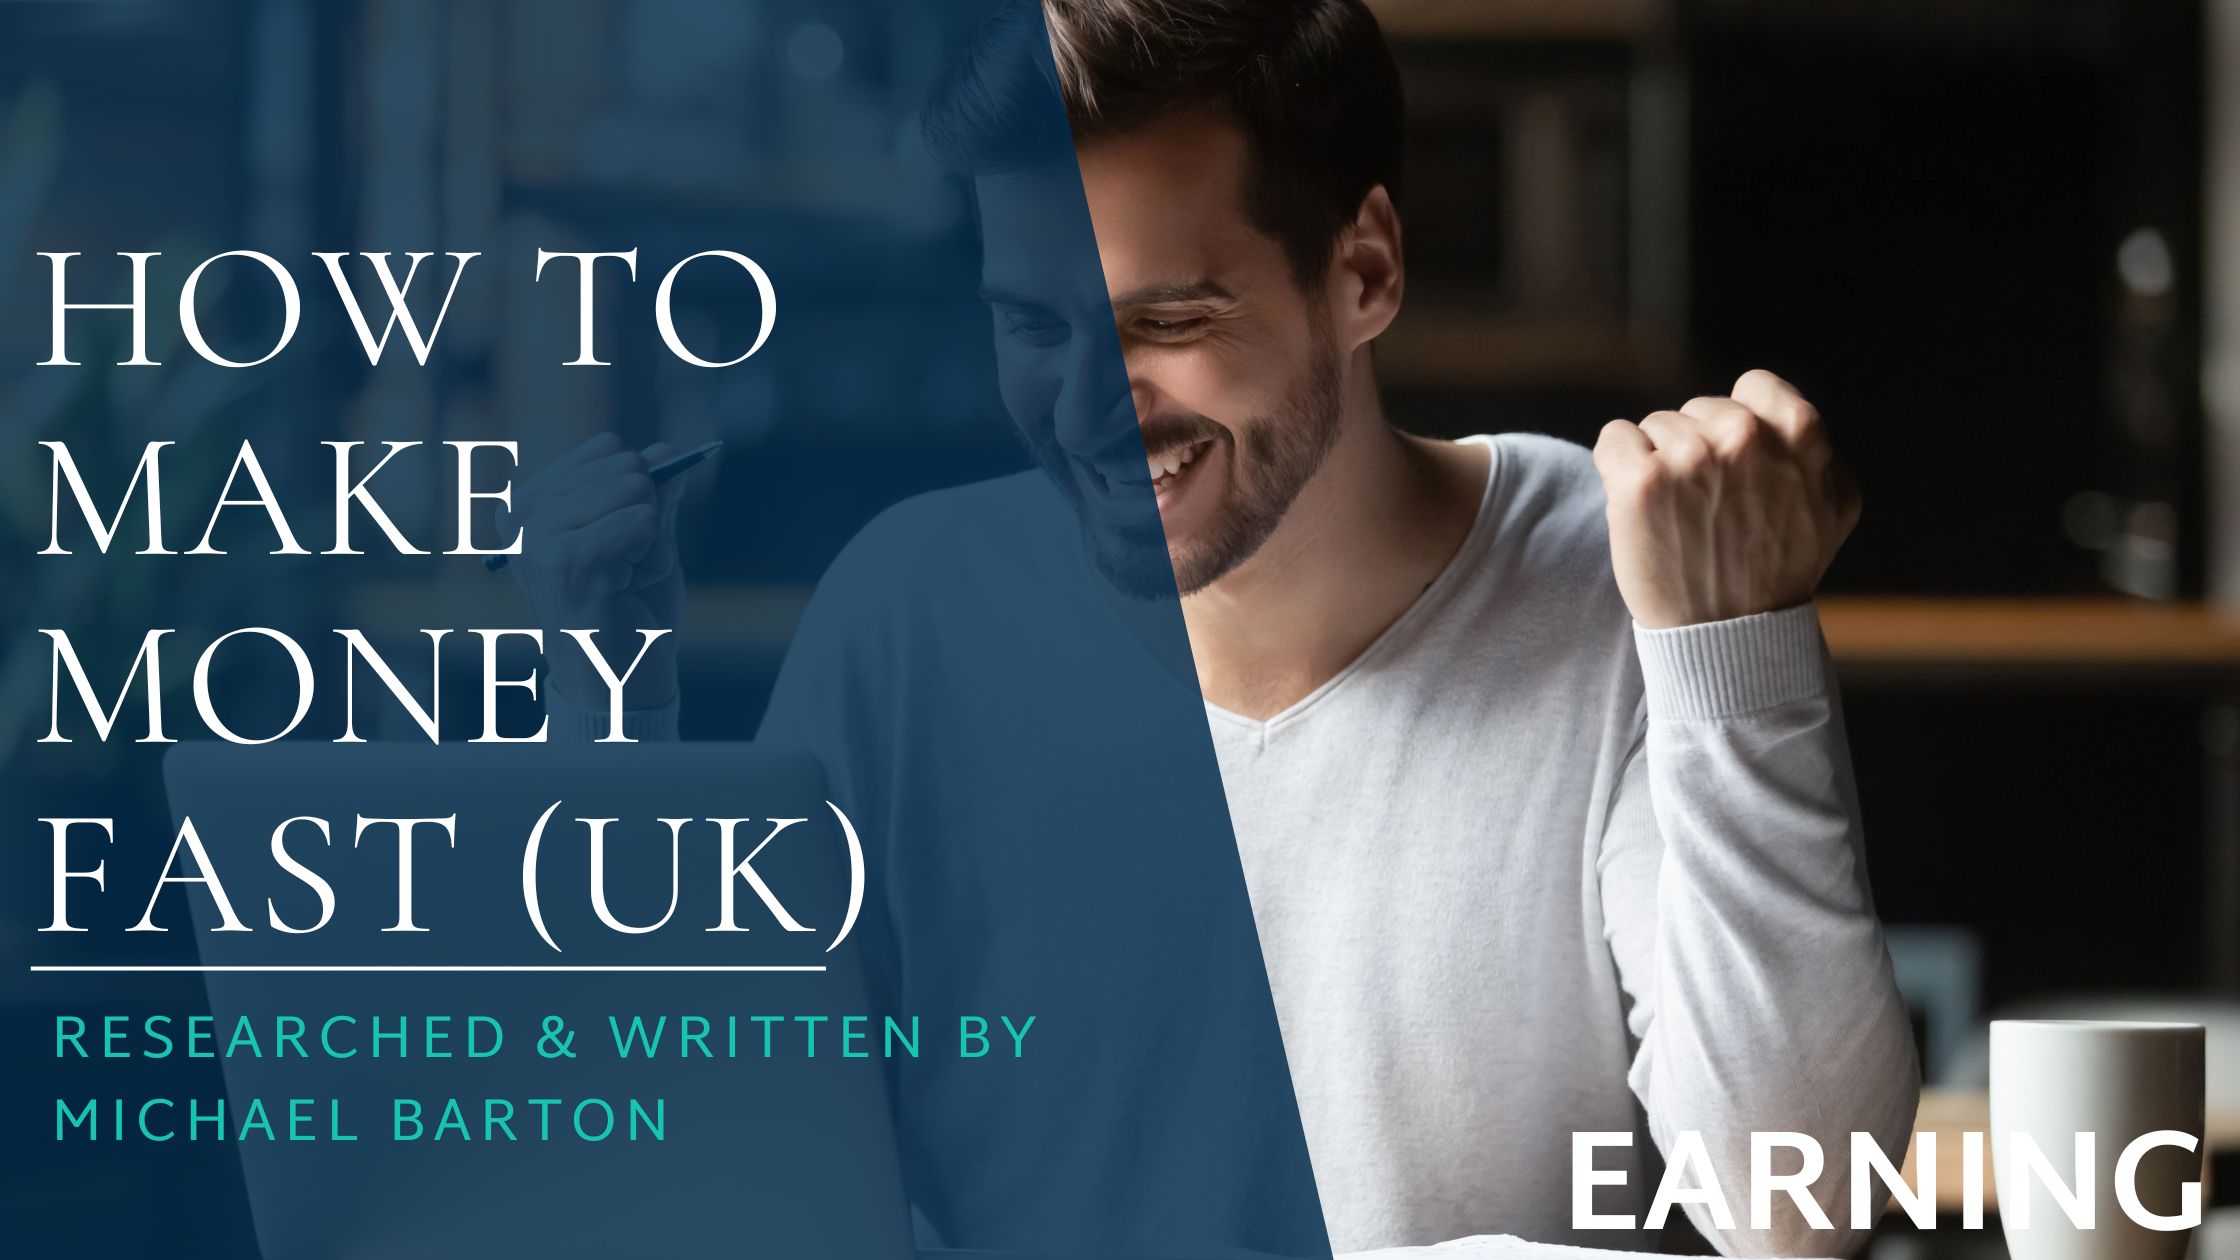 How To Make Money Fast (UK) feature image